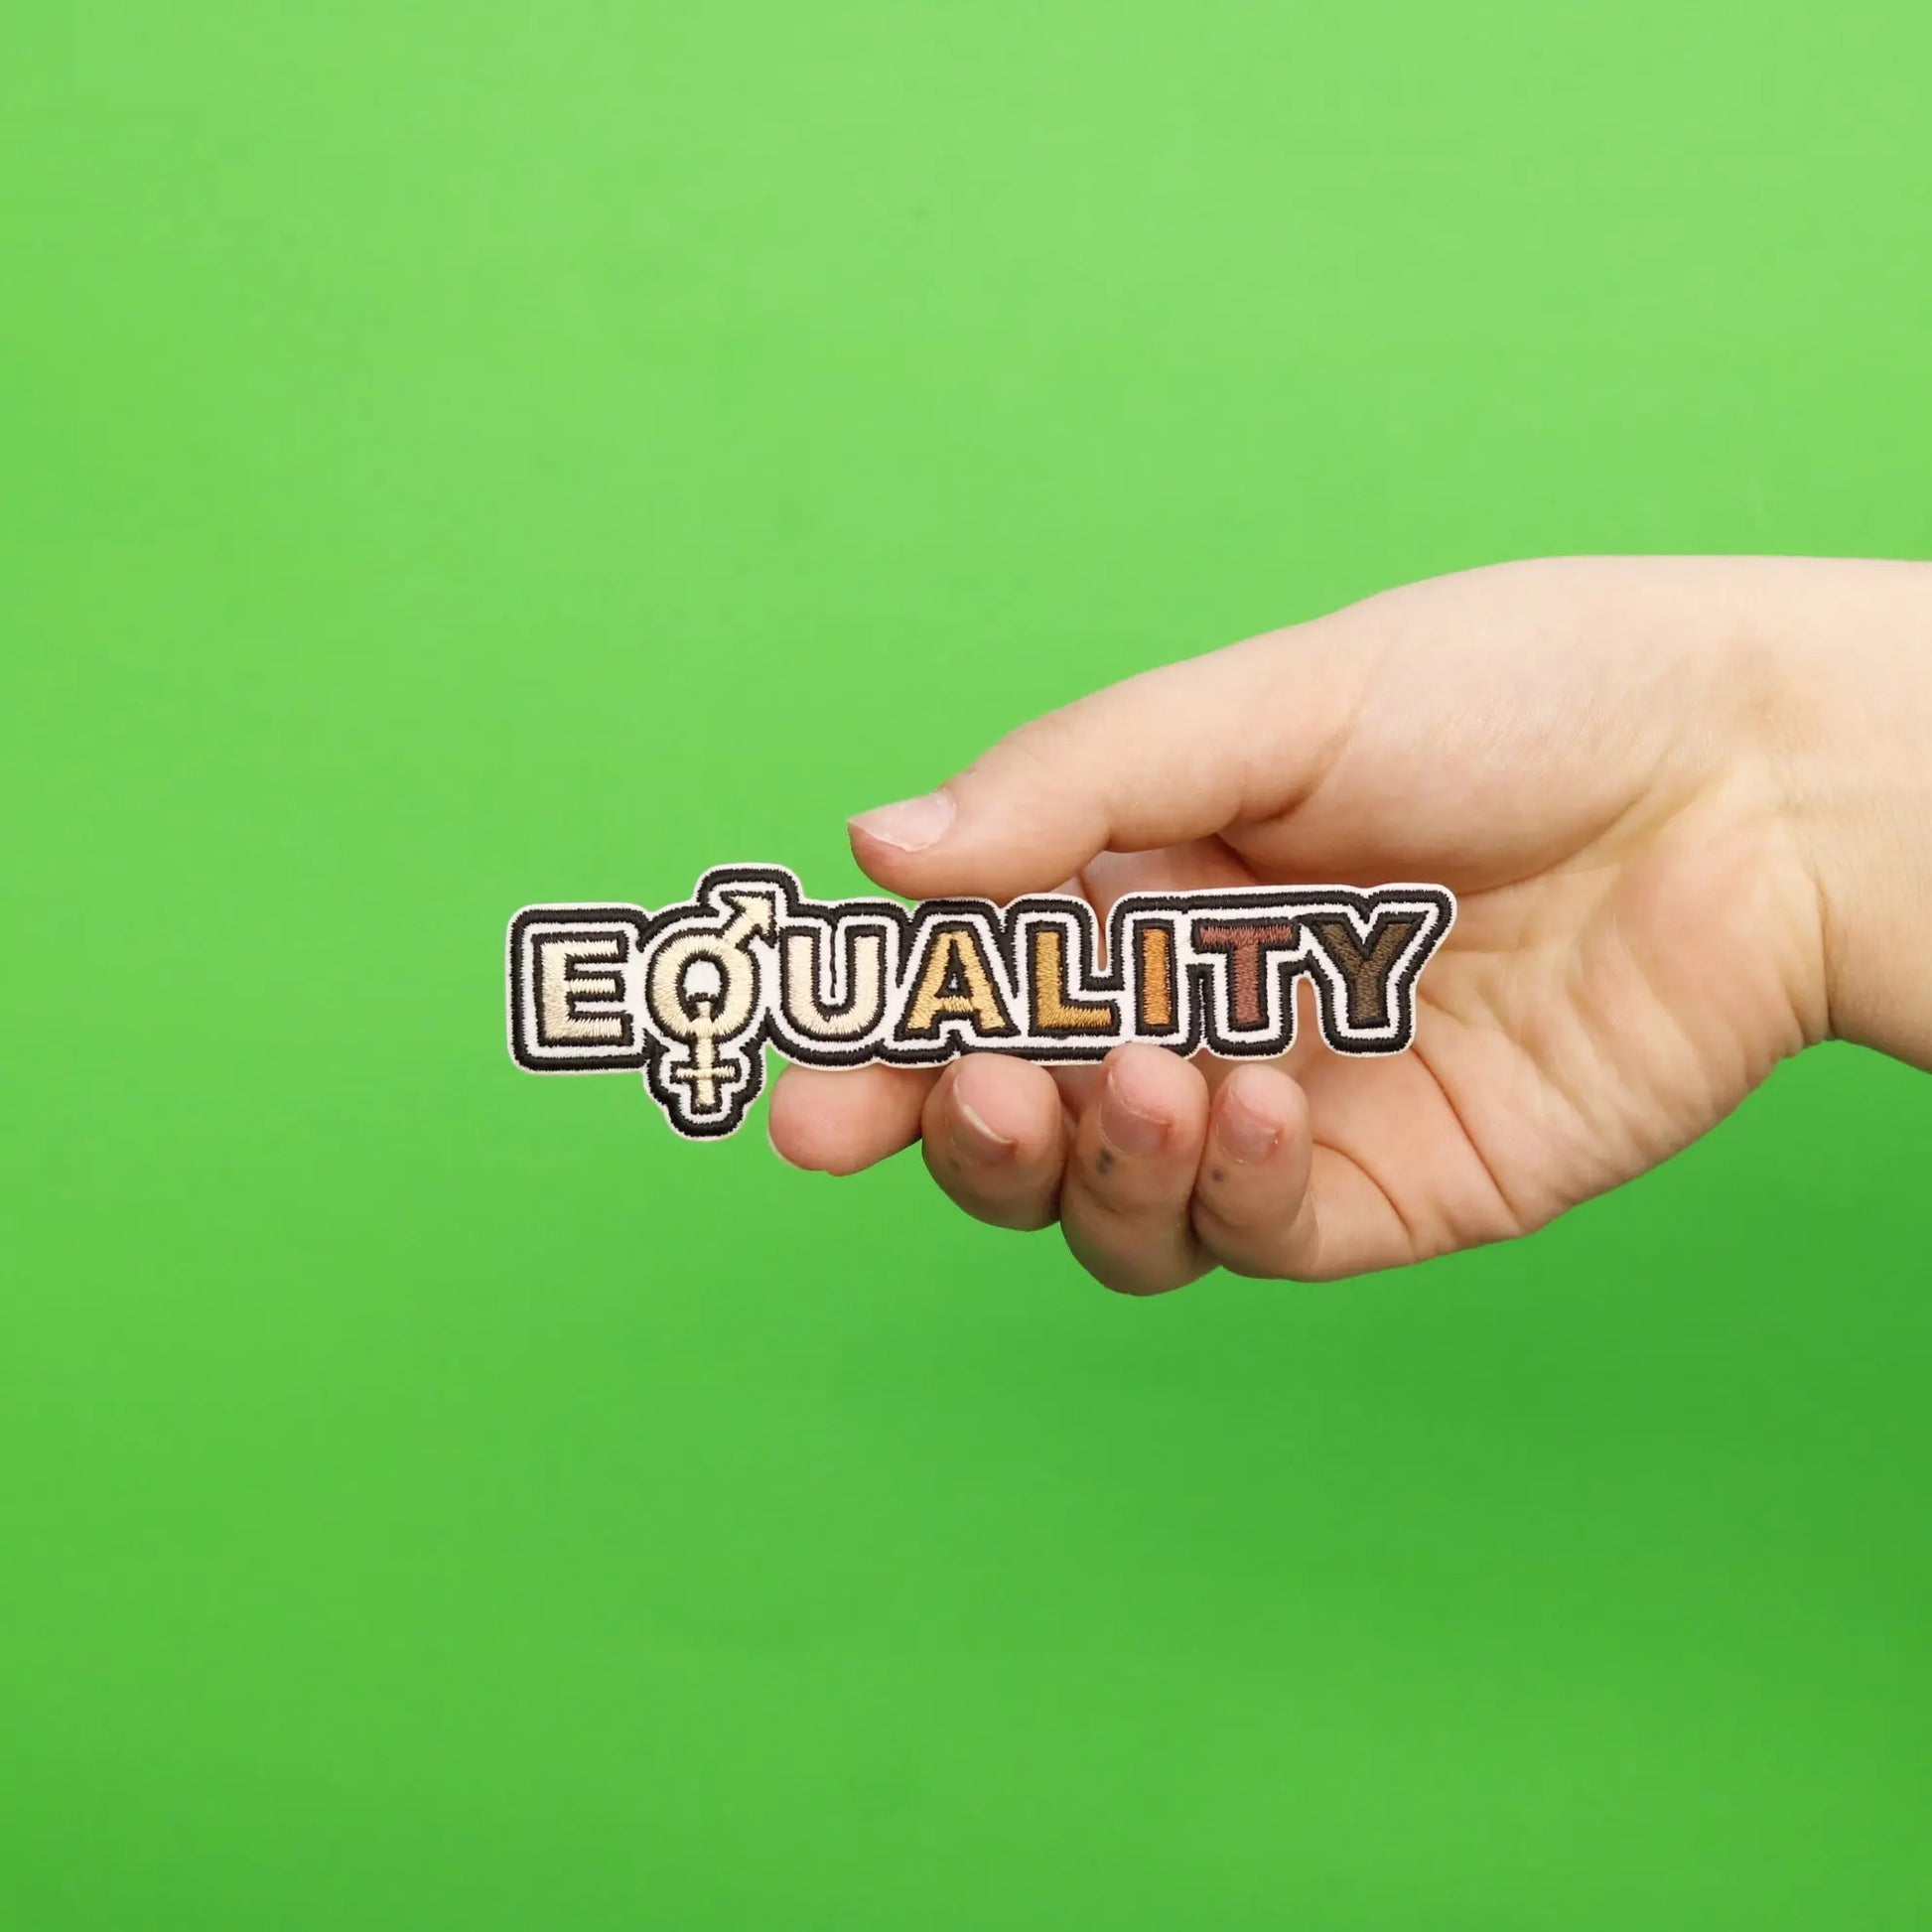 Equality Skintones Pride Embroidered Iron On Patch 